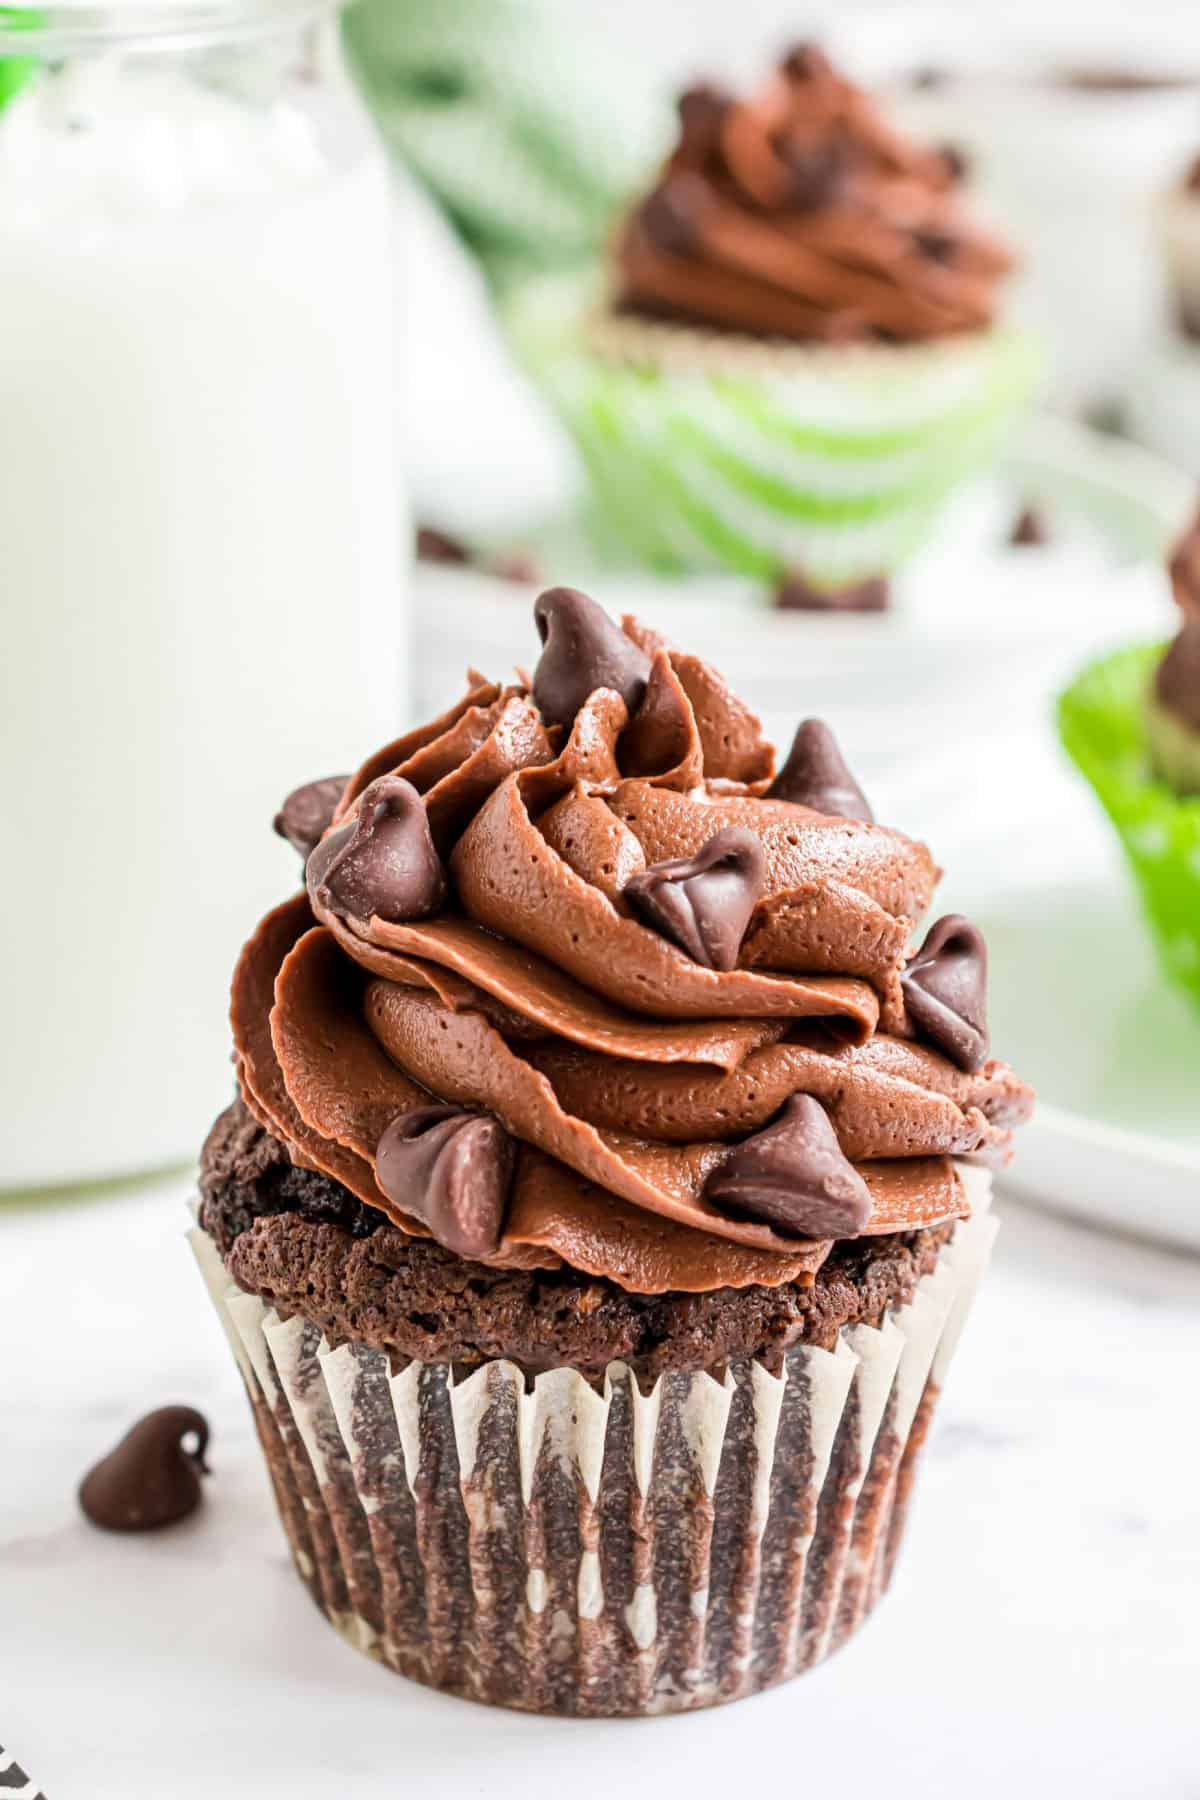 Chocolate cupcake in a white liner topped with chocolate frosting and chocolate chips.